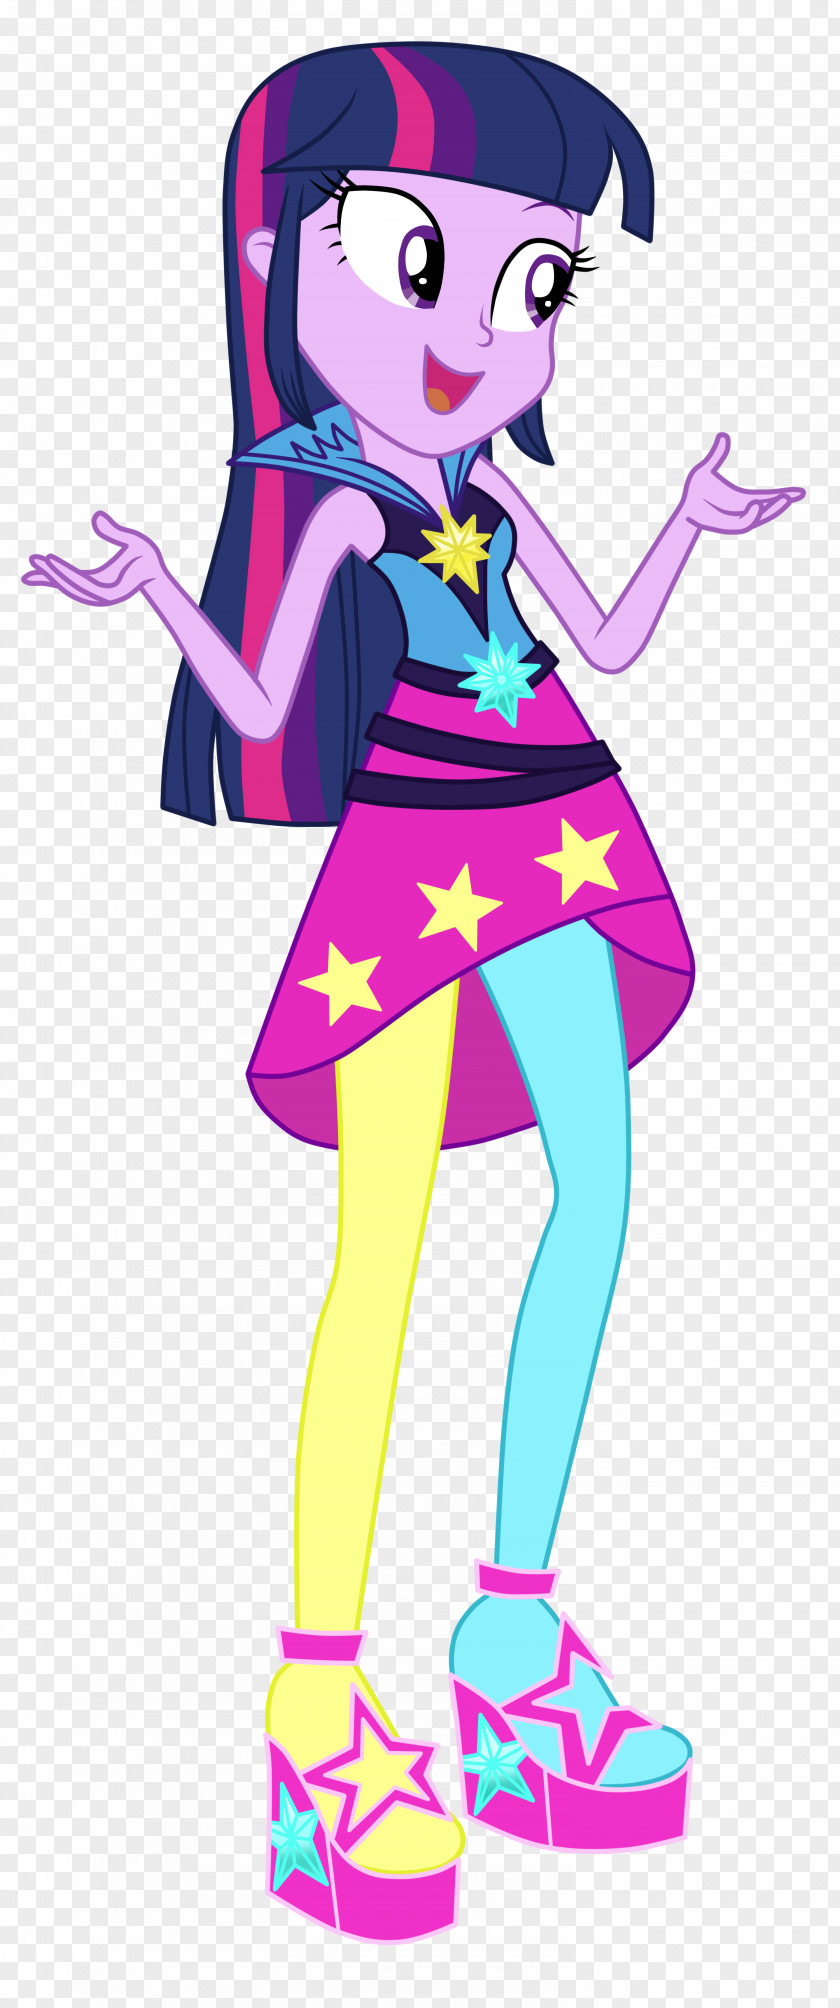 My Little Pony Equestria Girls Twilight Sparkle Dr Pinkie Pie Rarity Rainbow Dash Sunset Shimmer PNG